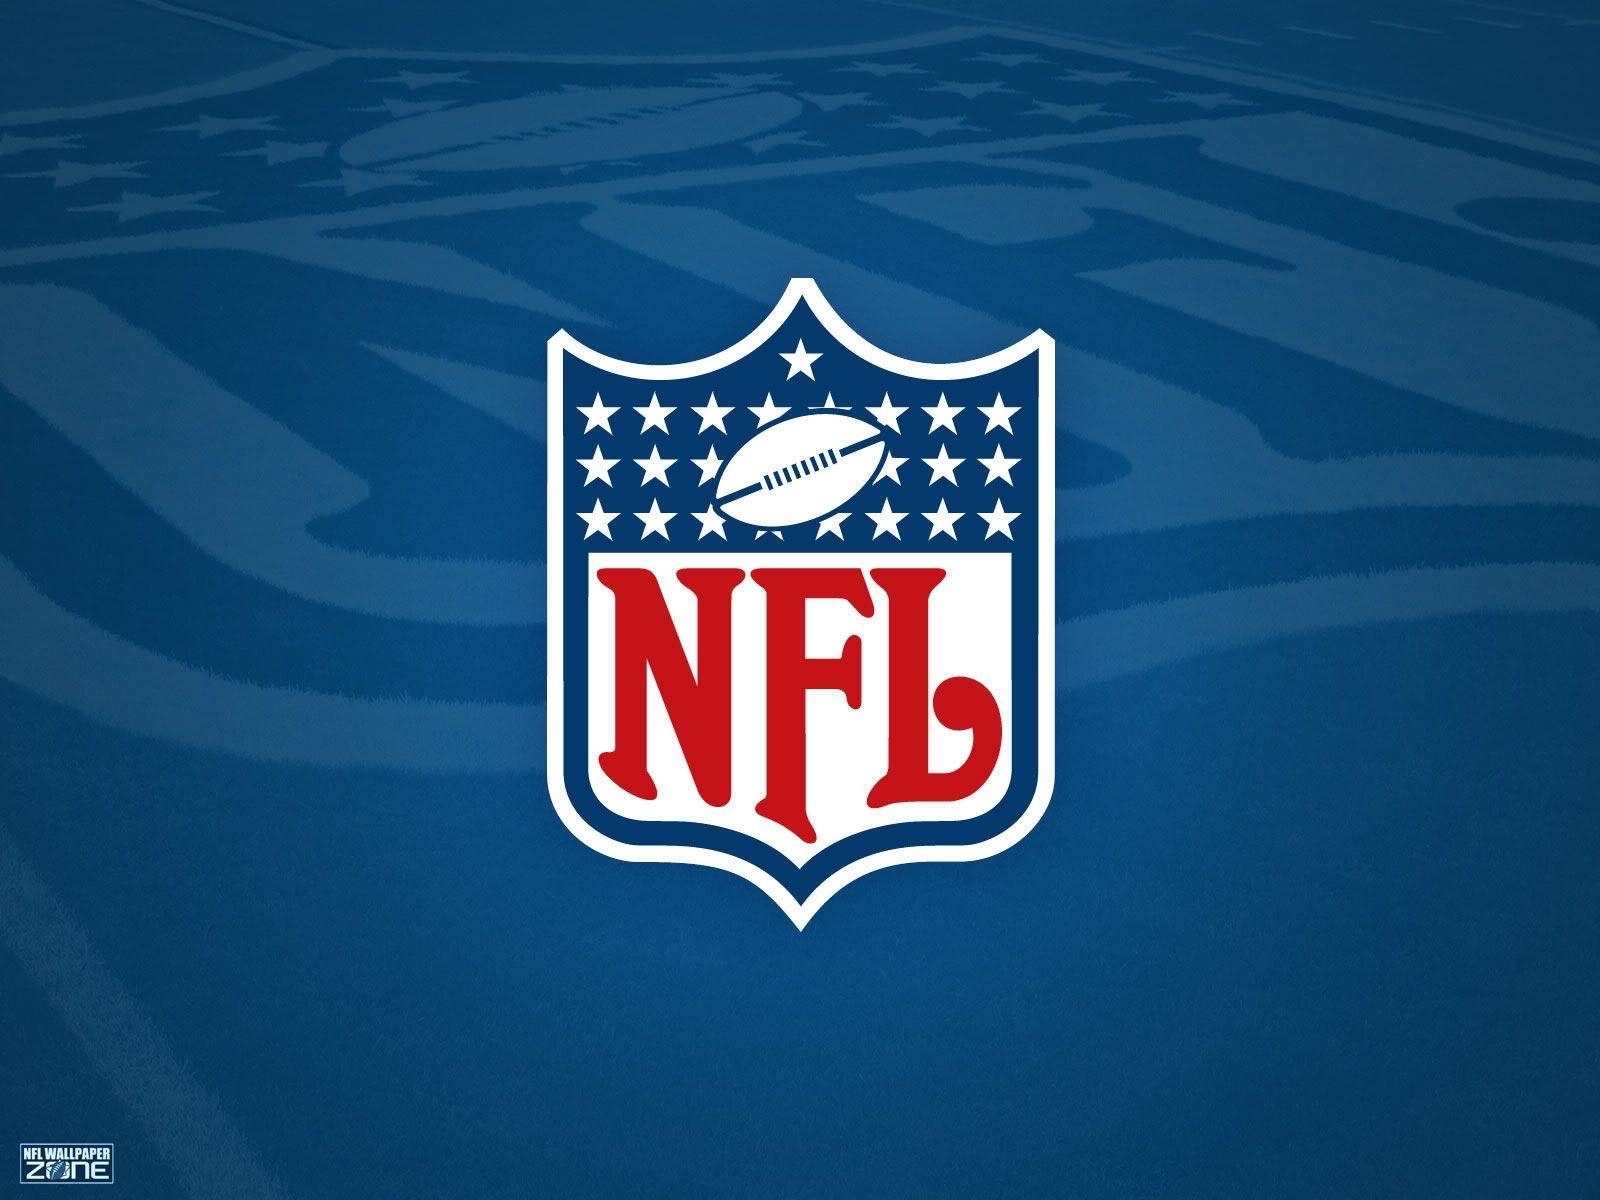 10 Latest Nfl Wallpaper For Android FULL HD 1080p For PC Desktop